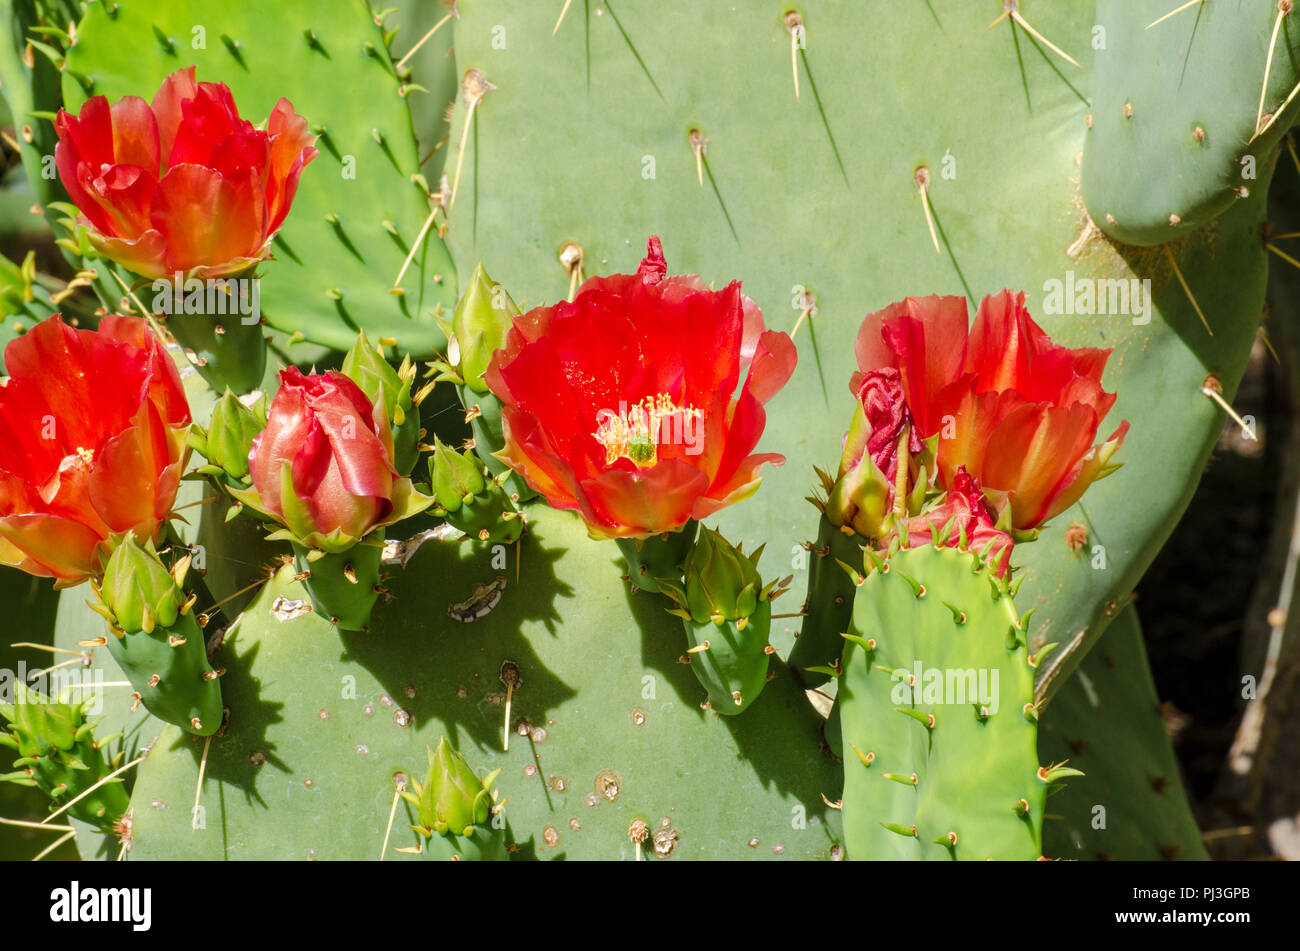 Green cactus with red flowers. Stock Photo